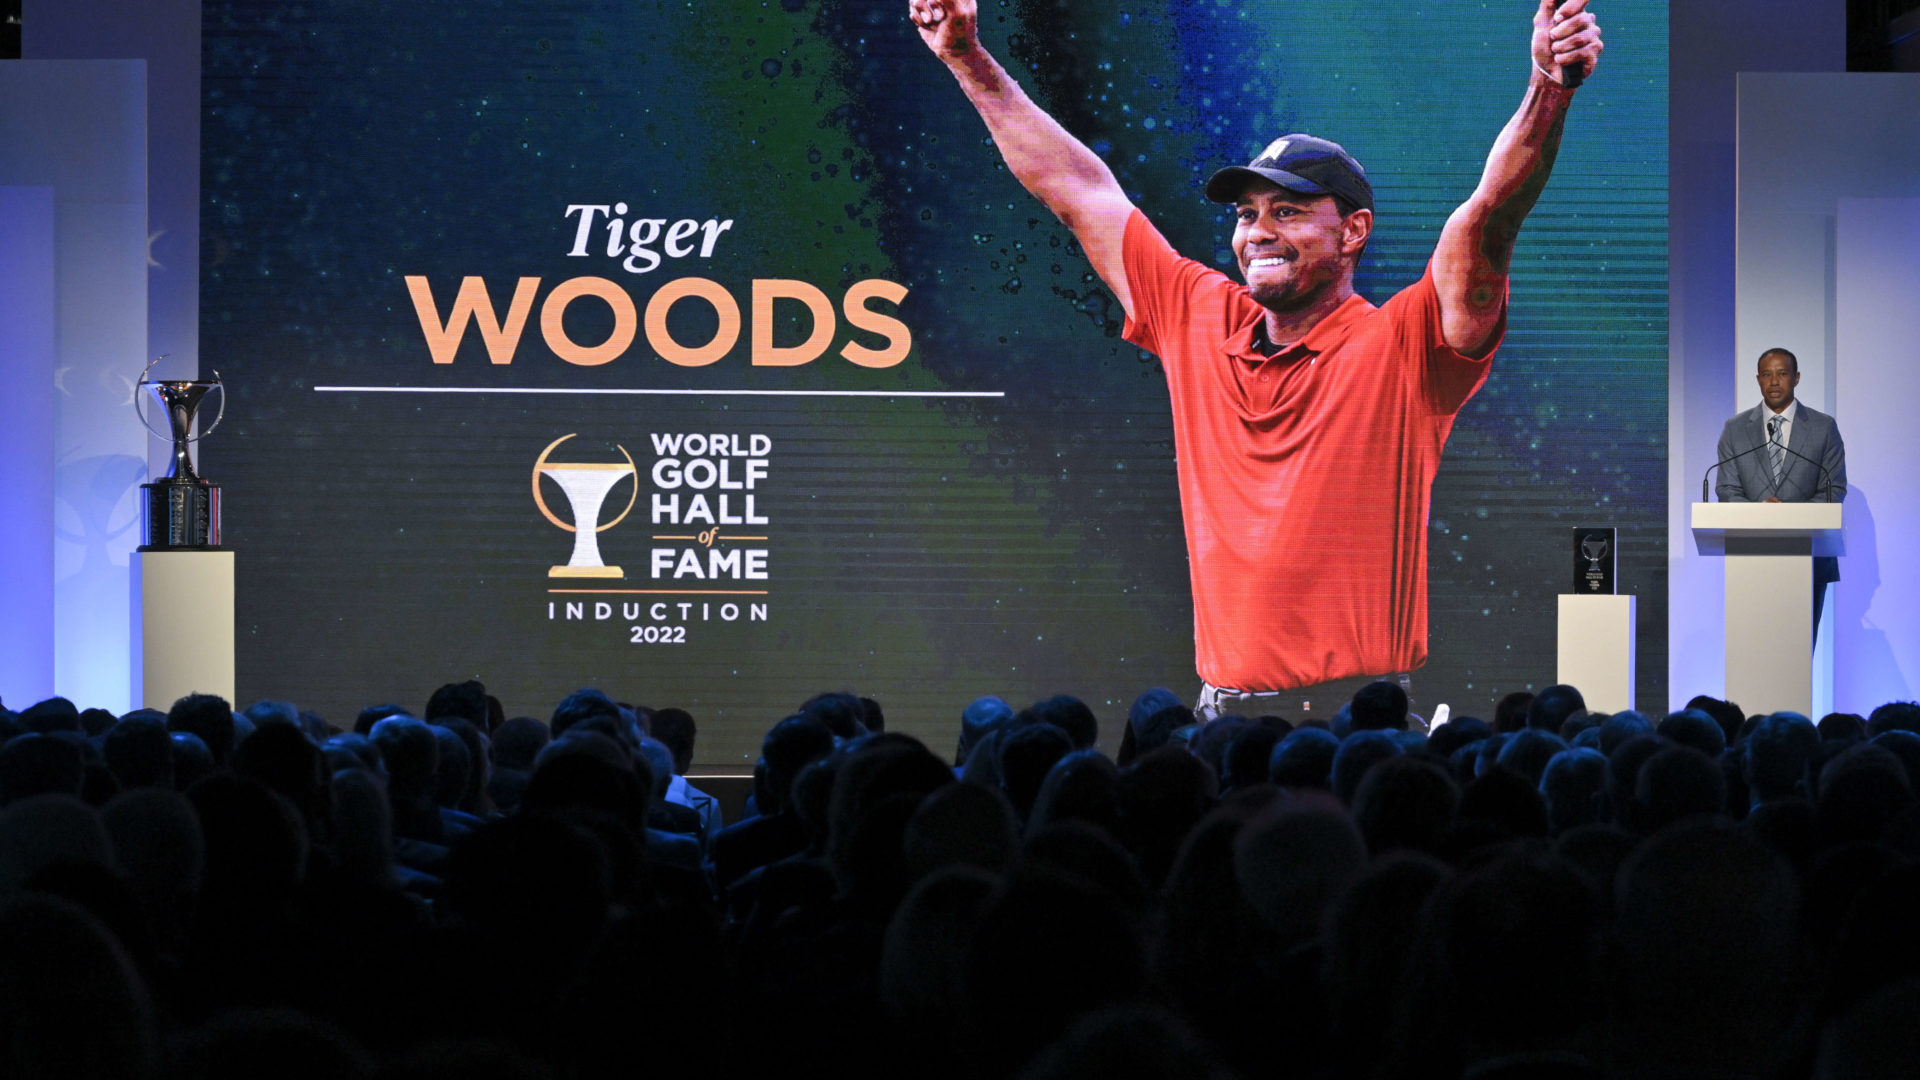 PONTE VEDRA BEACH, FL - MARCH 09: Tiger Woods speaks after being inducte during the World Golf Hall of Fame Induction Ceremony prior to THE PLAYERS Championship at PGA TOUR Global Home on March 9, 2022, in Ponte Vedra Beach, FL. (Photo by Ben Jared/PGA TOUR via Getty Images)